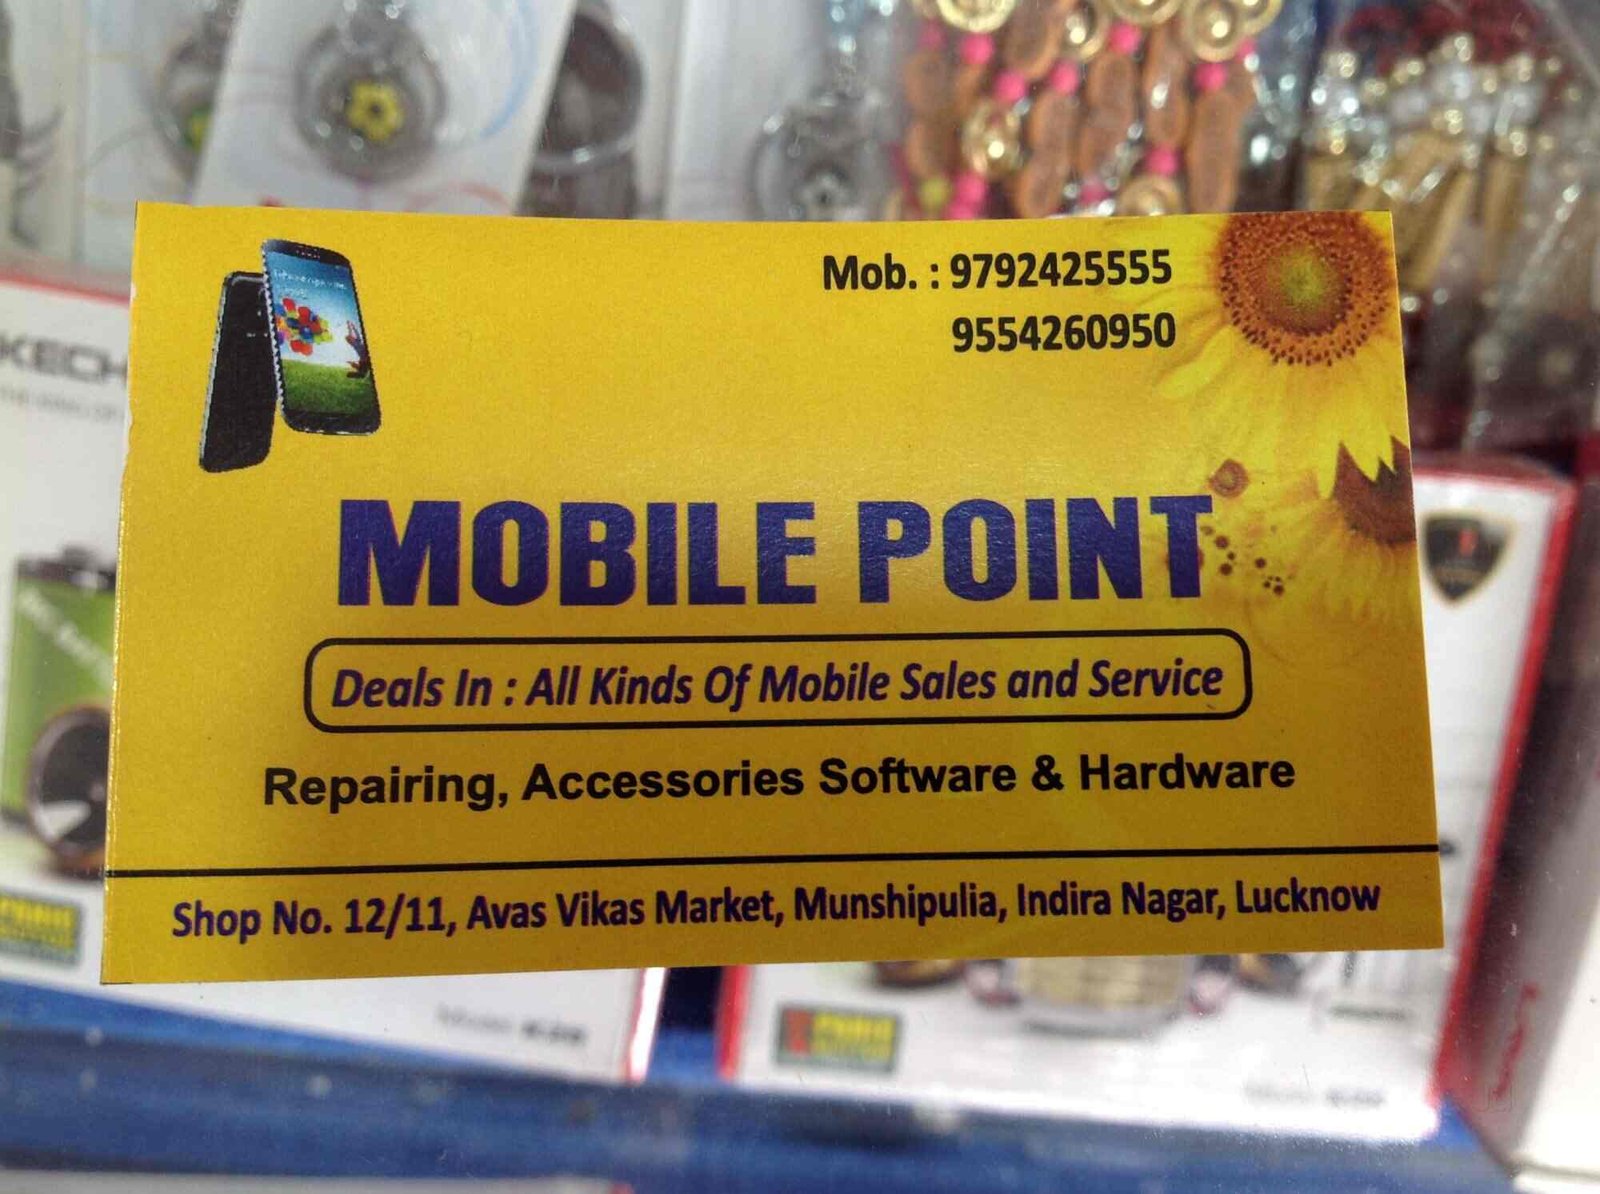 Mobile Point